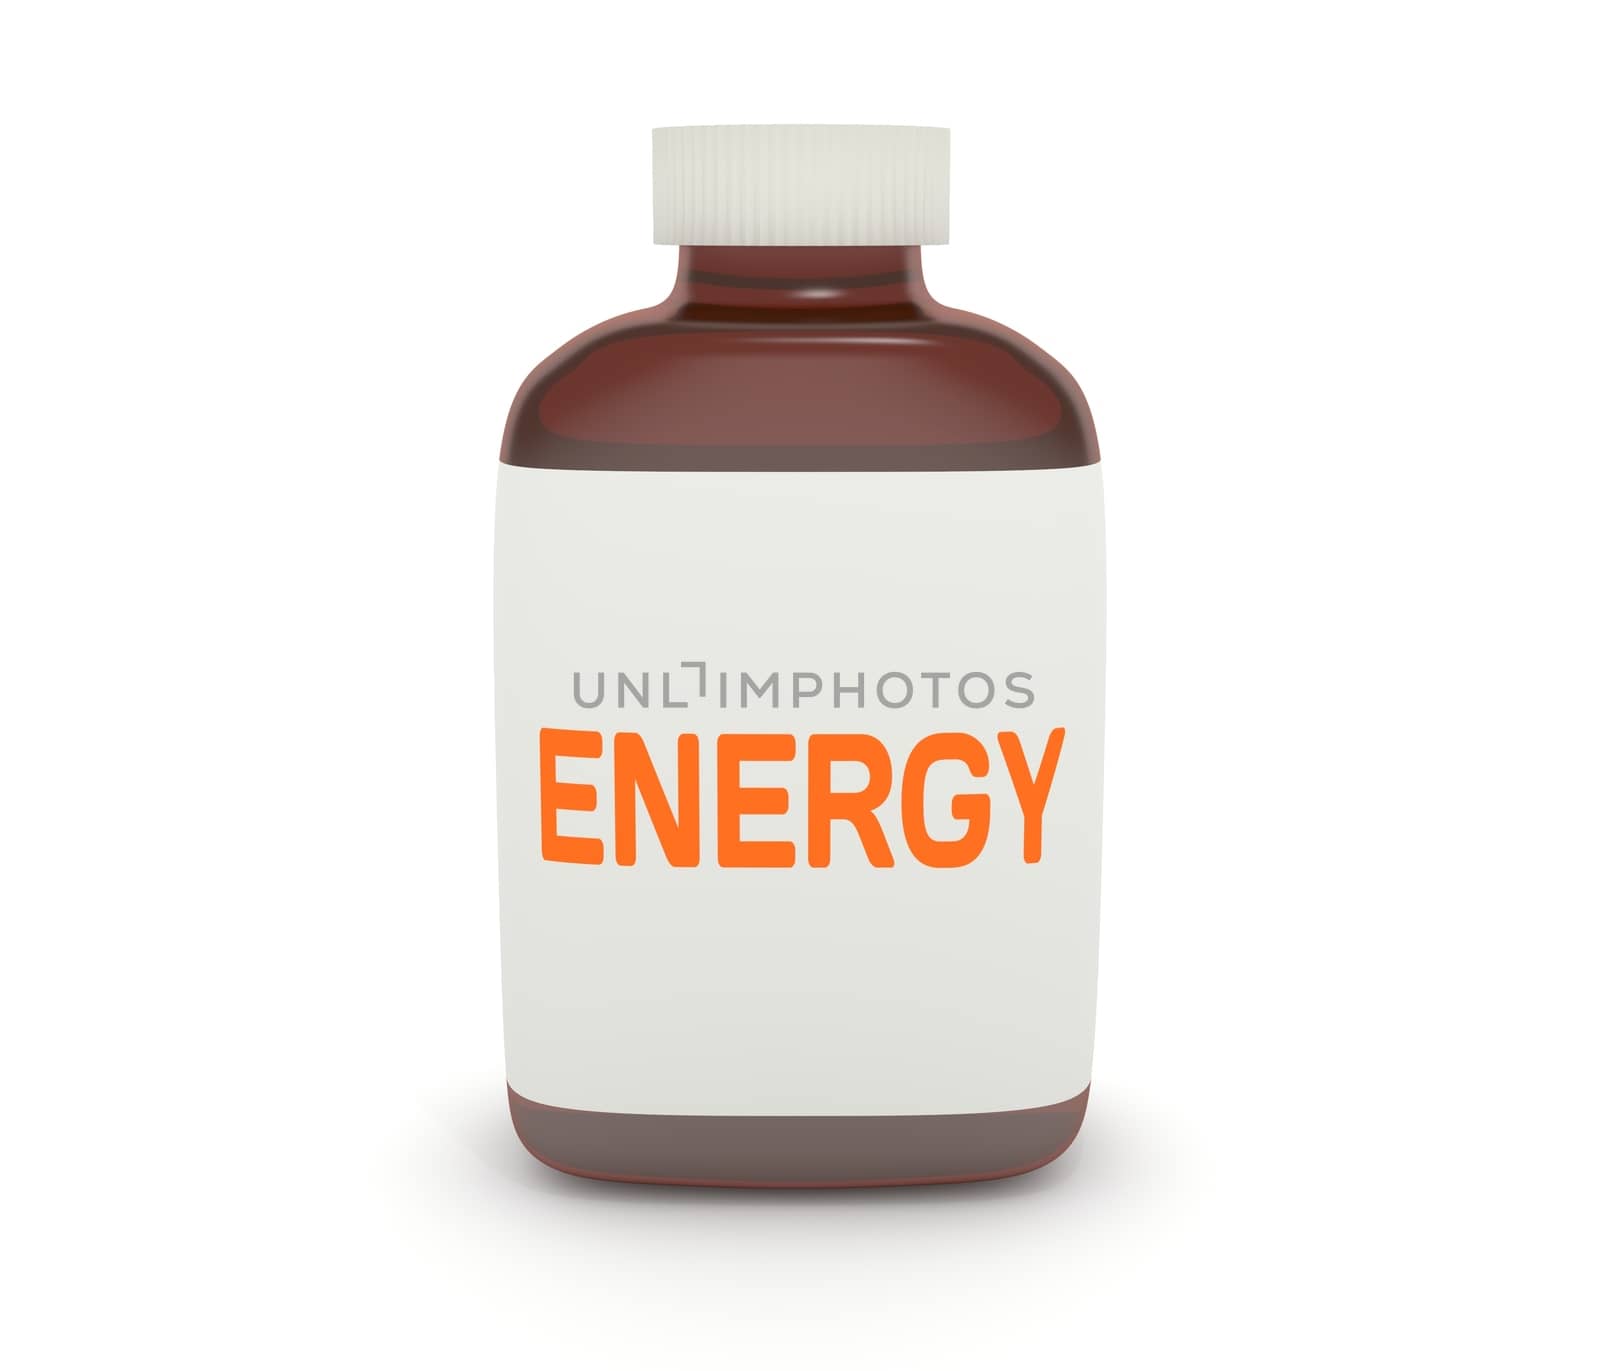 Illustration of a medicine bottle with the word "Energy" on the label